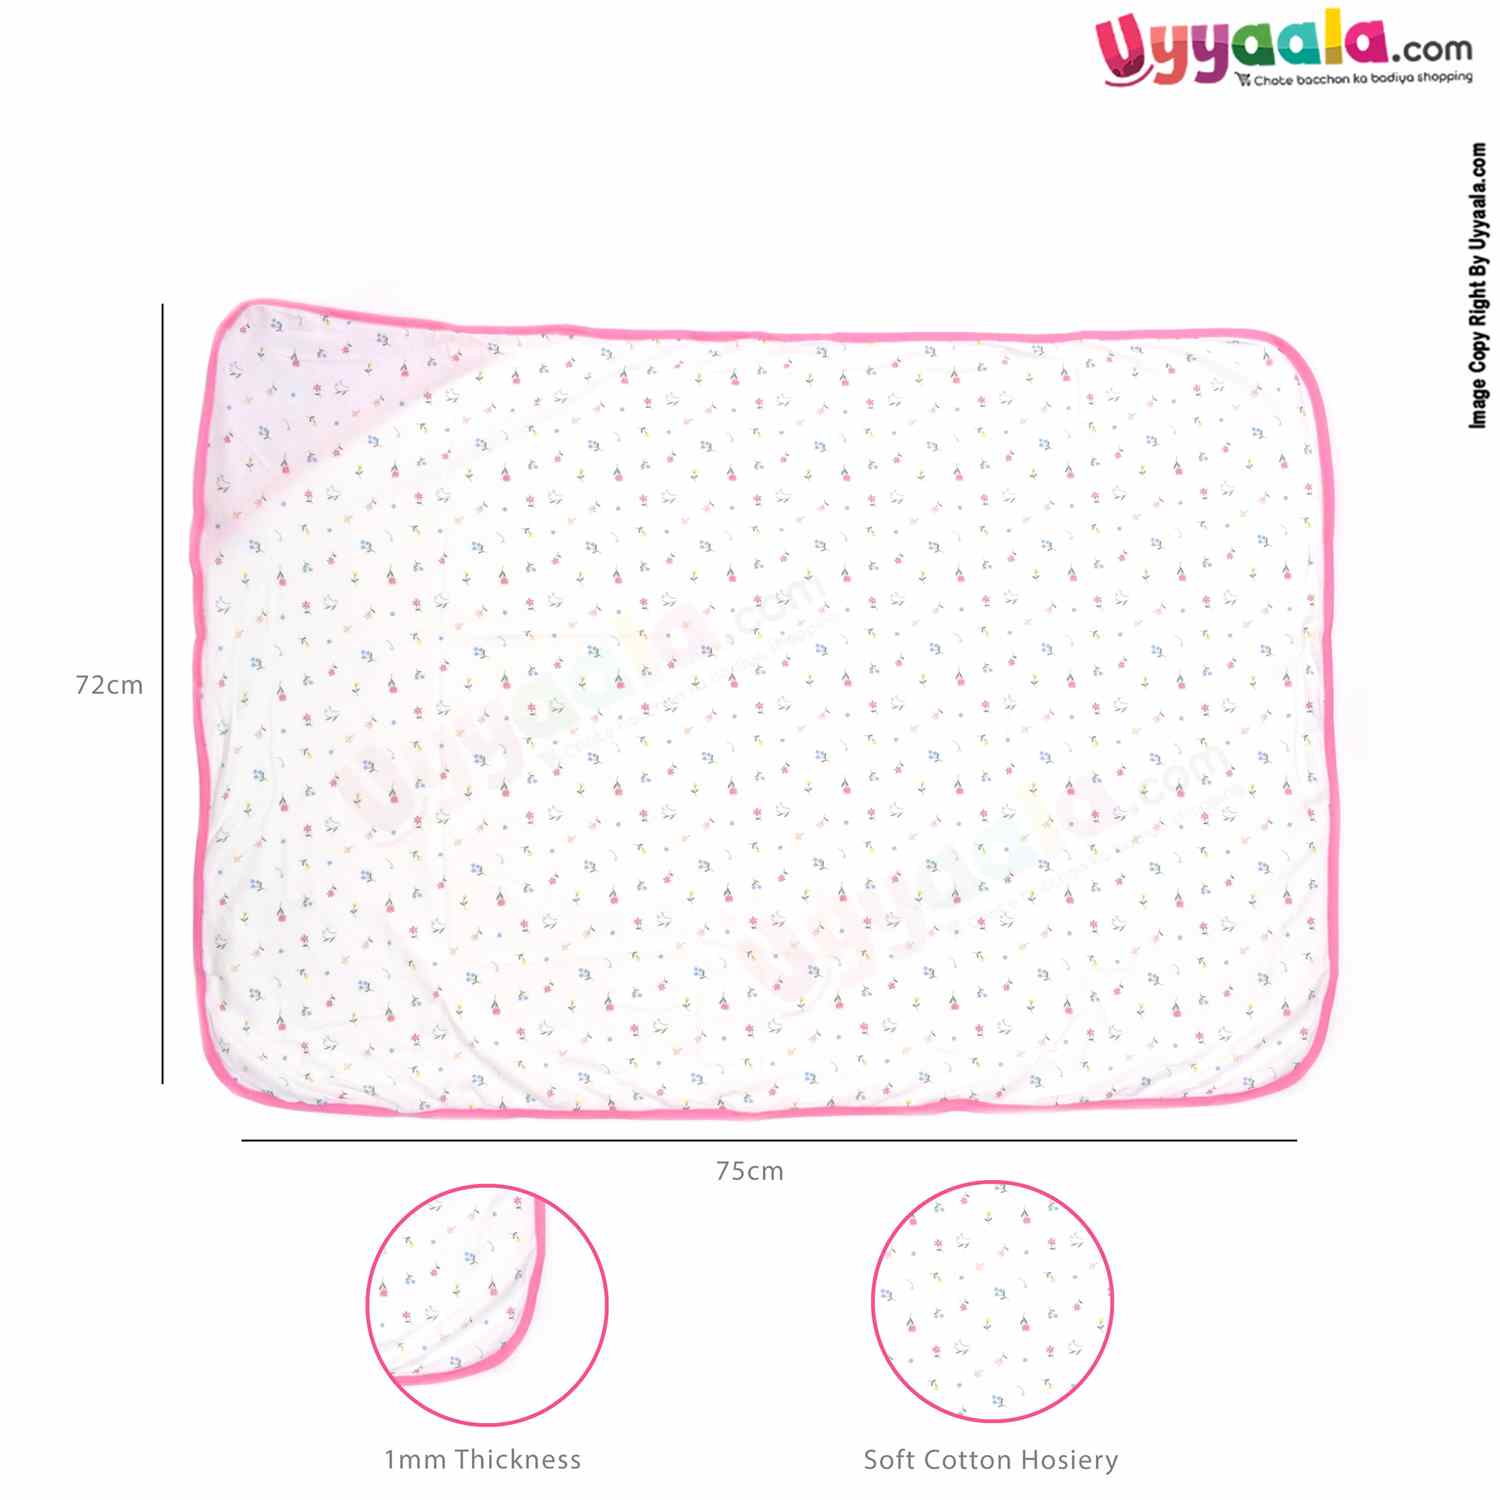 Cotton Hosiery Hooded Towel for Babies with Floral Print 1pc 0+m Age, Size (75*72Cm)- Pink & White